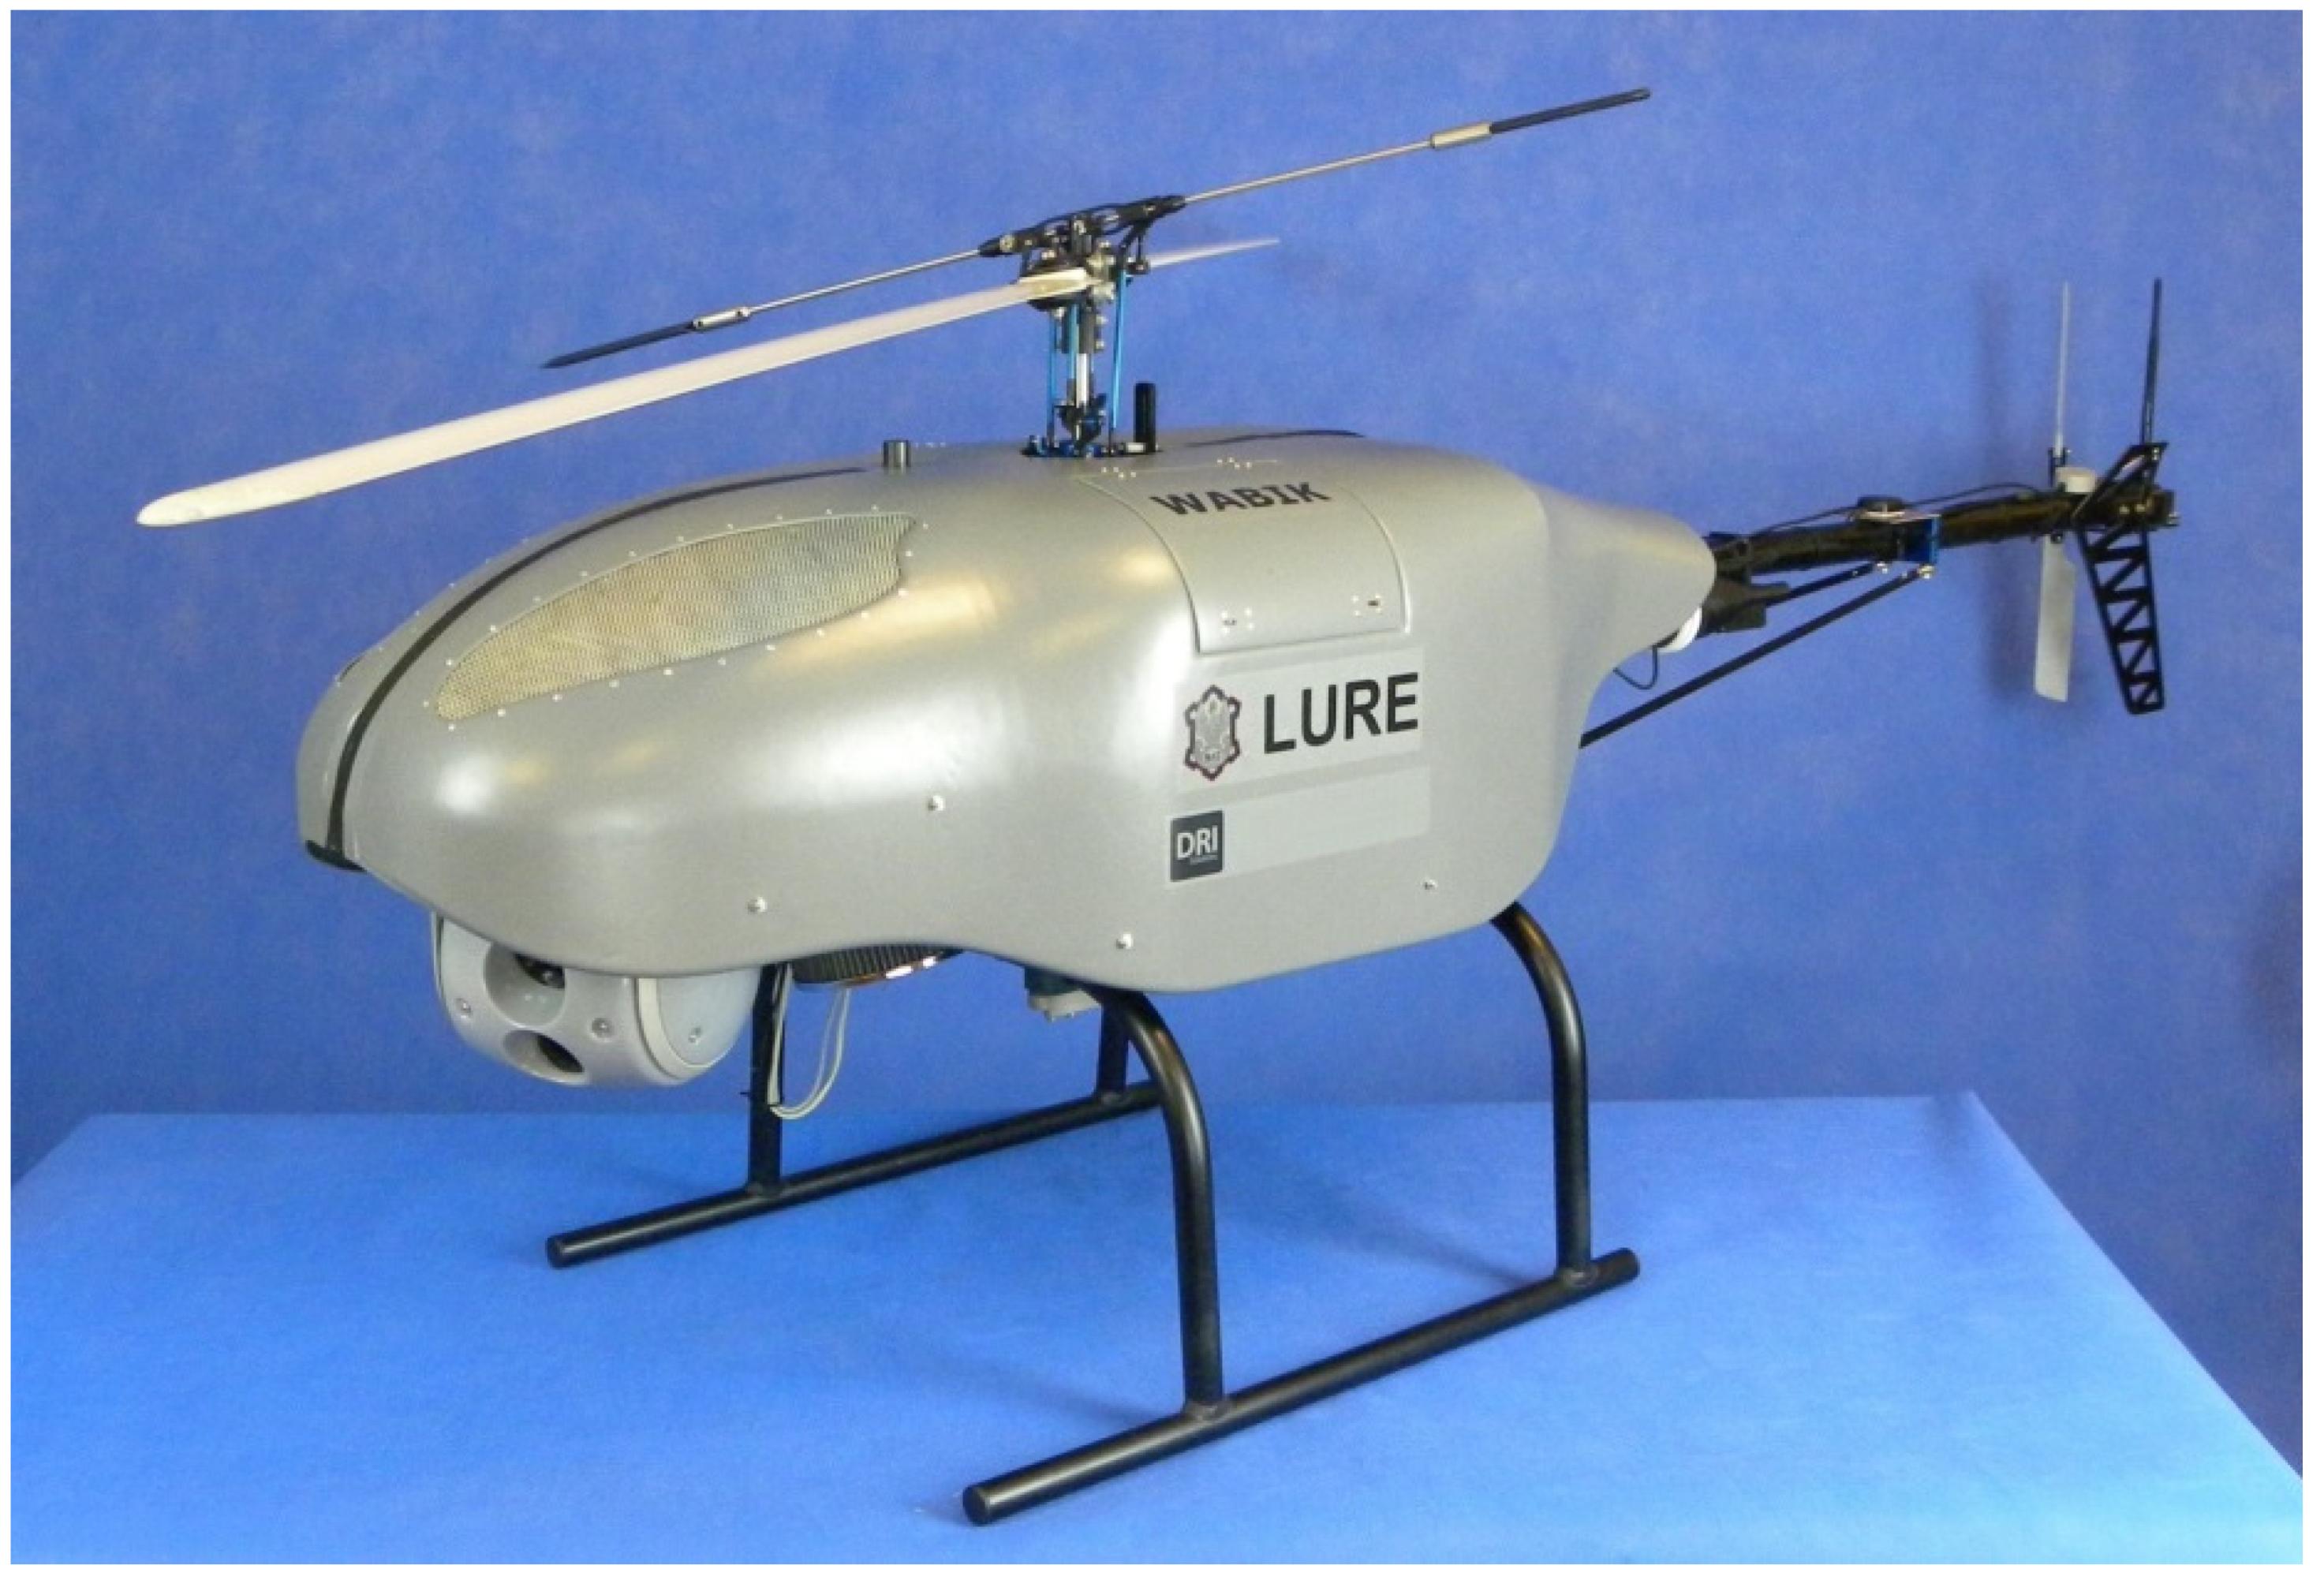 Smart Remote Control Helicopter: Innovations in AI, nano technology, and materials make for a bright future for smart remote control helicopters.